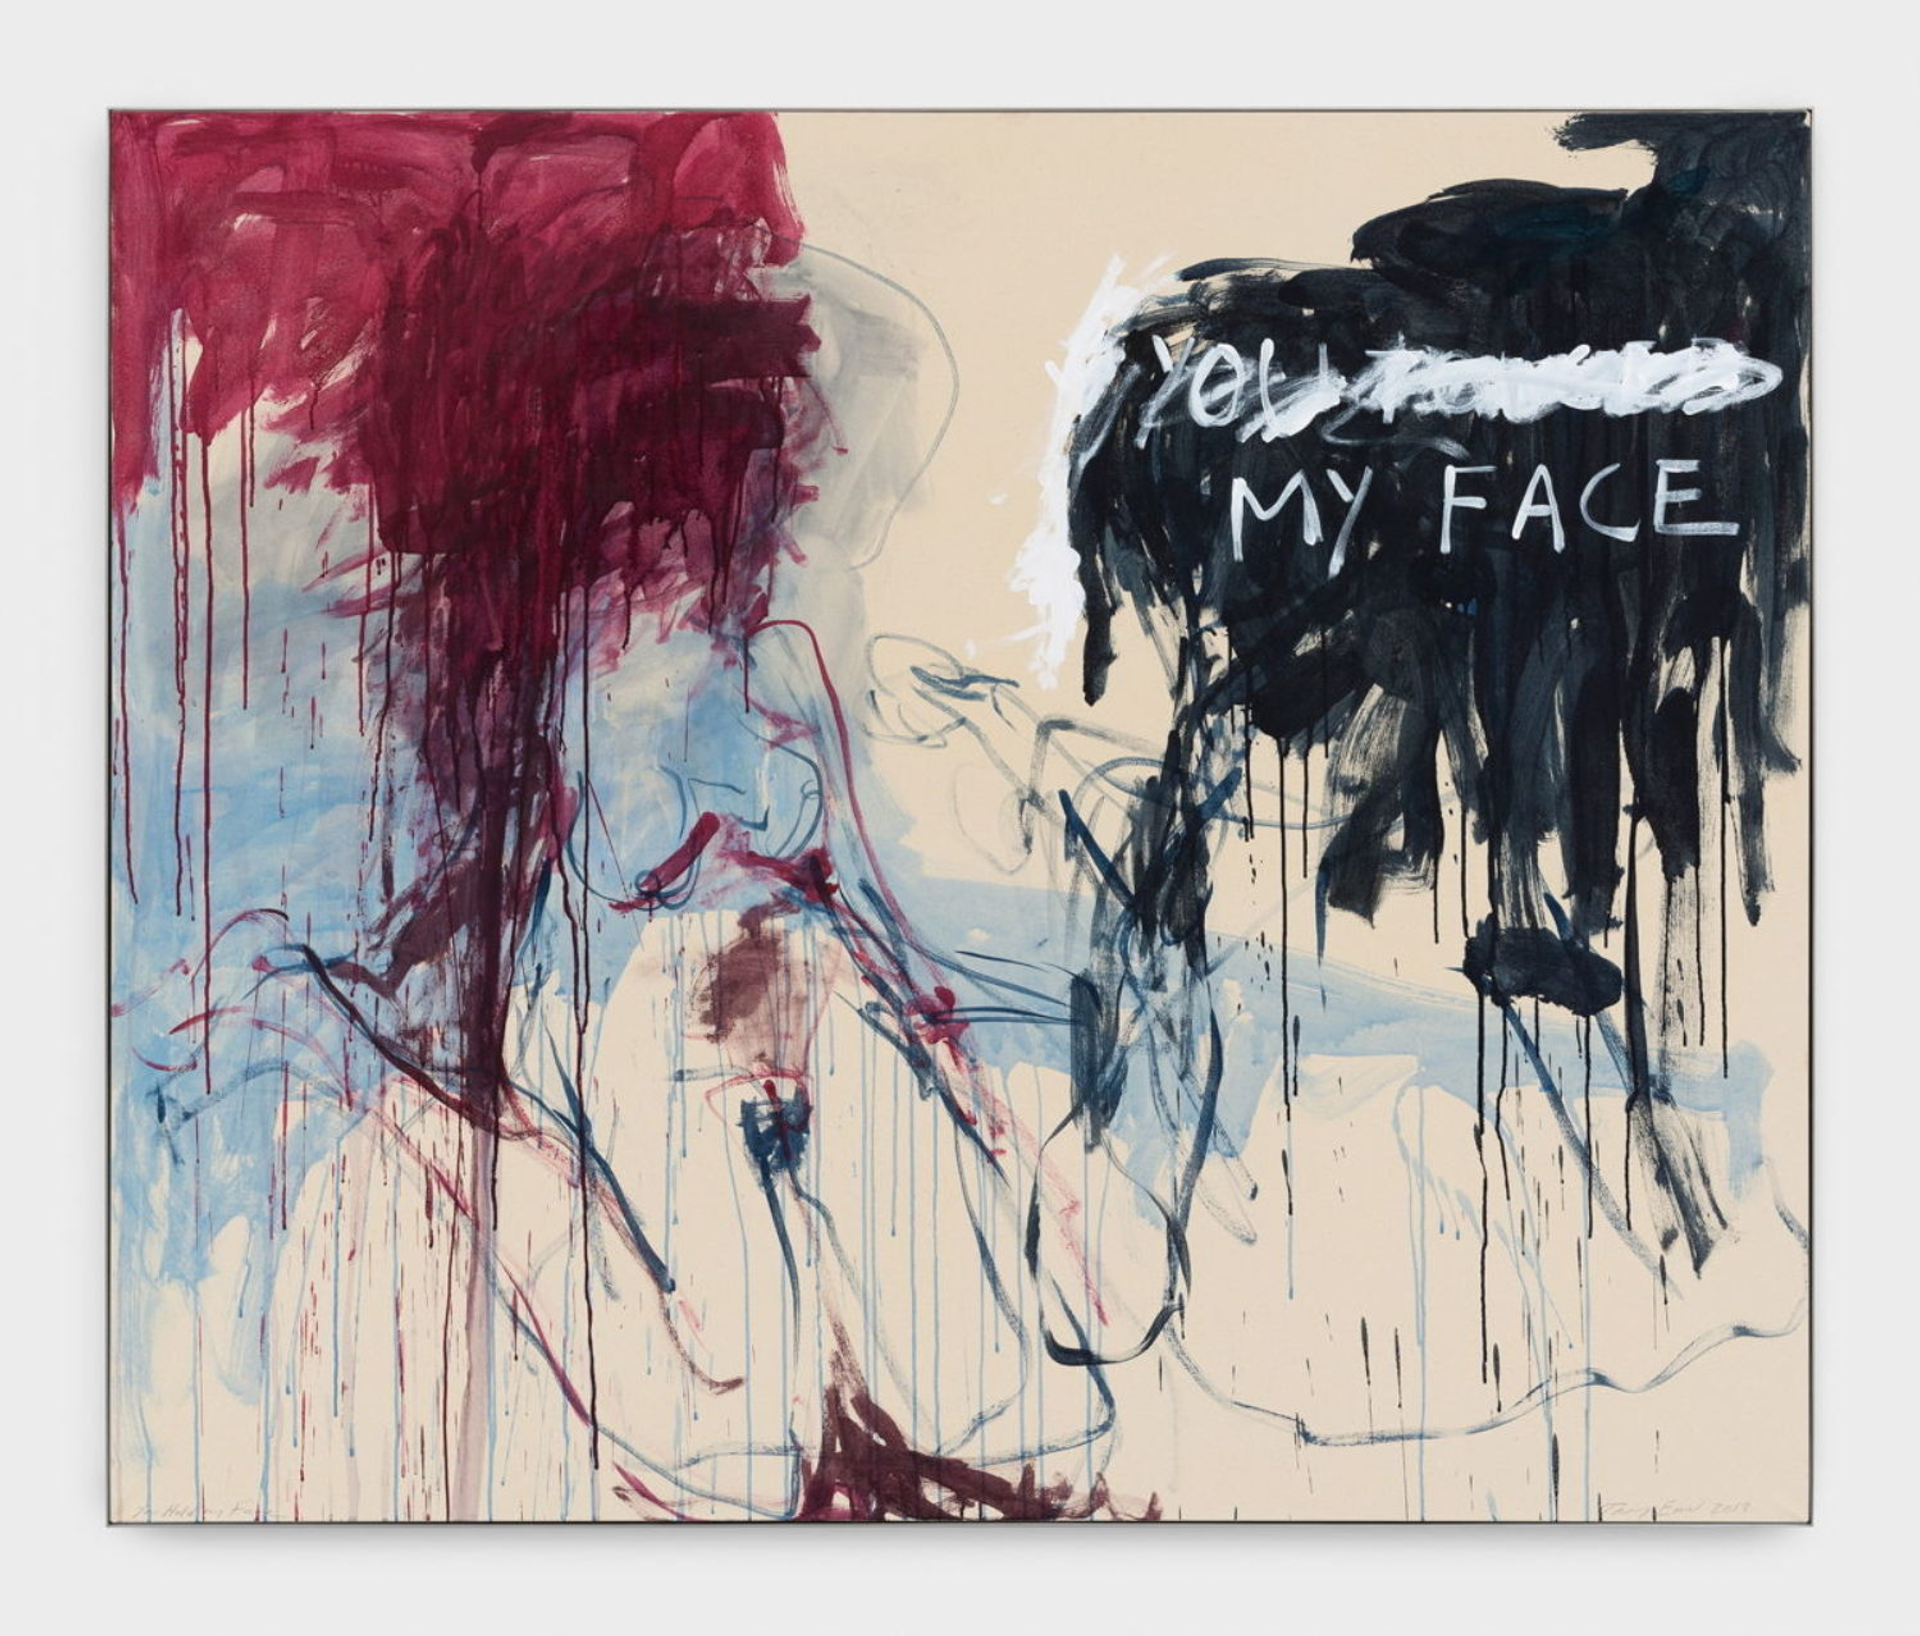 Tracey Emin’s You Held My Face. Painting of a woman, nude, sitting on her knees. Red paint covers her face with the text “you my face” in white against black paint to the right. 